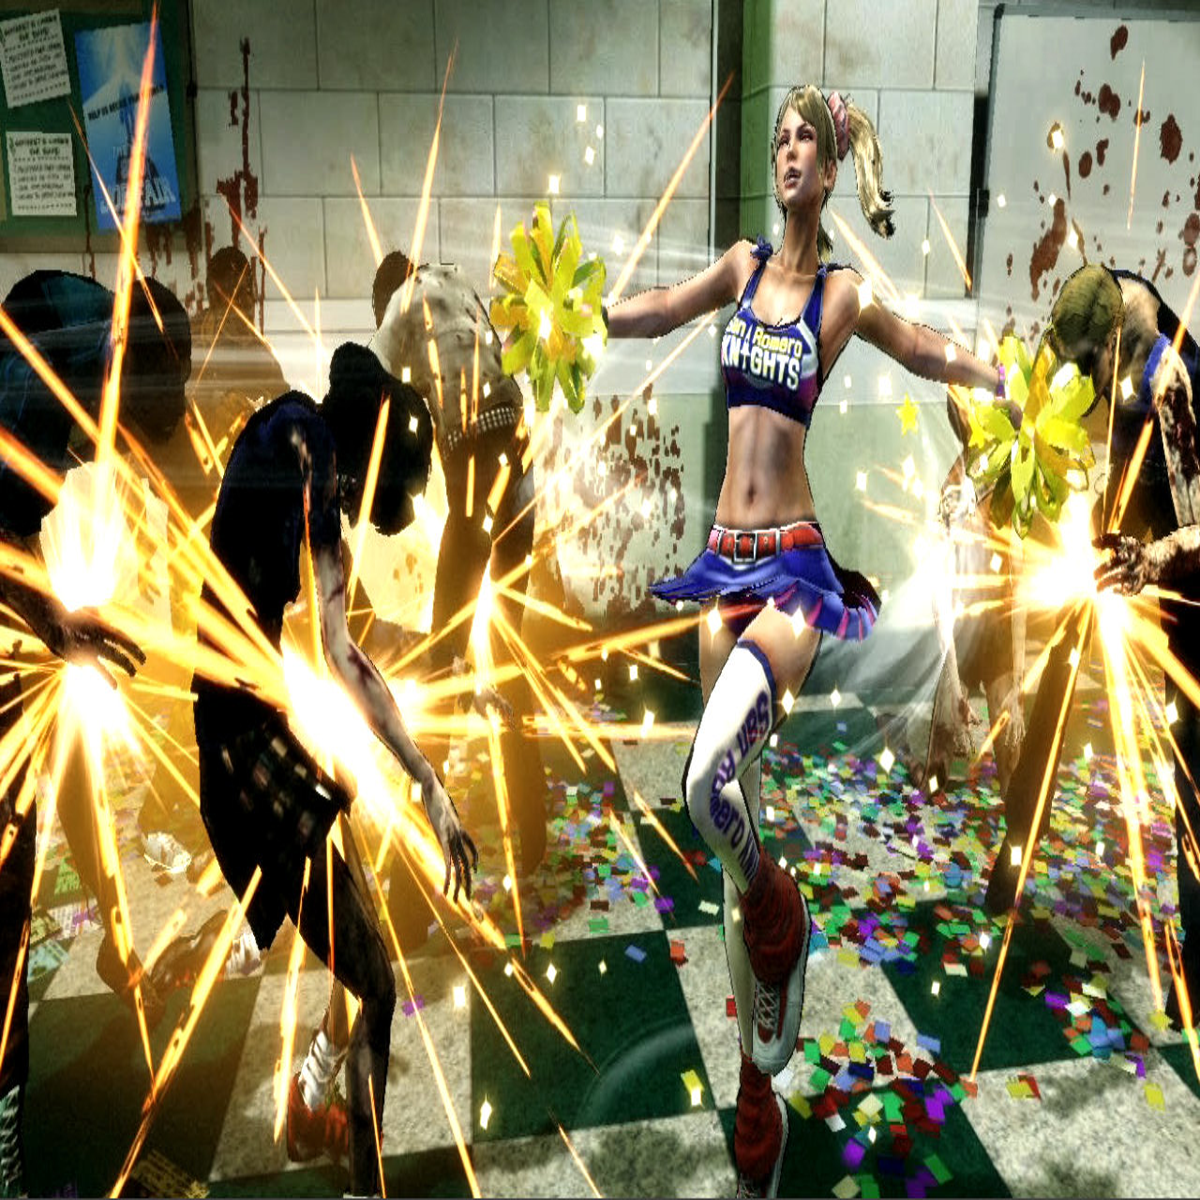 Lollipop Chainsaw Remake offically announced for 2023